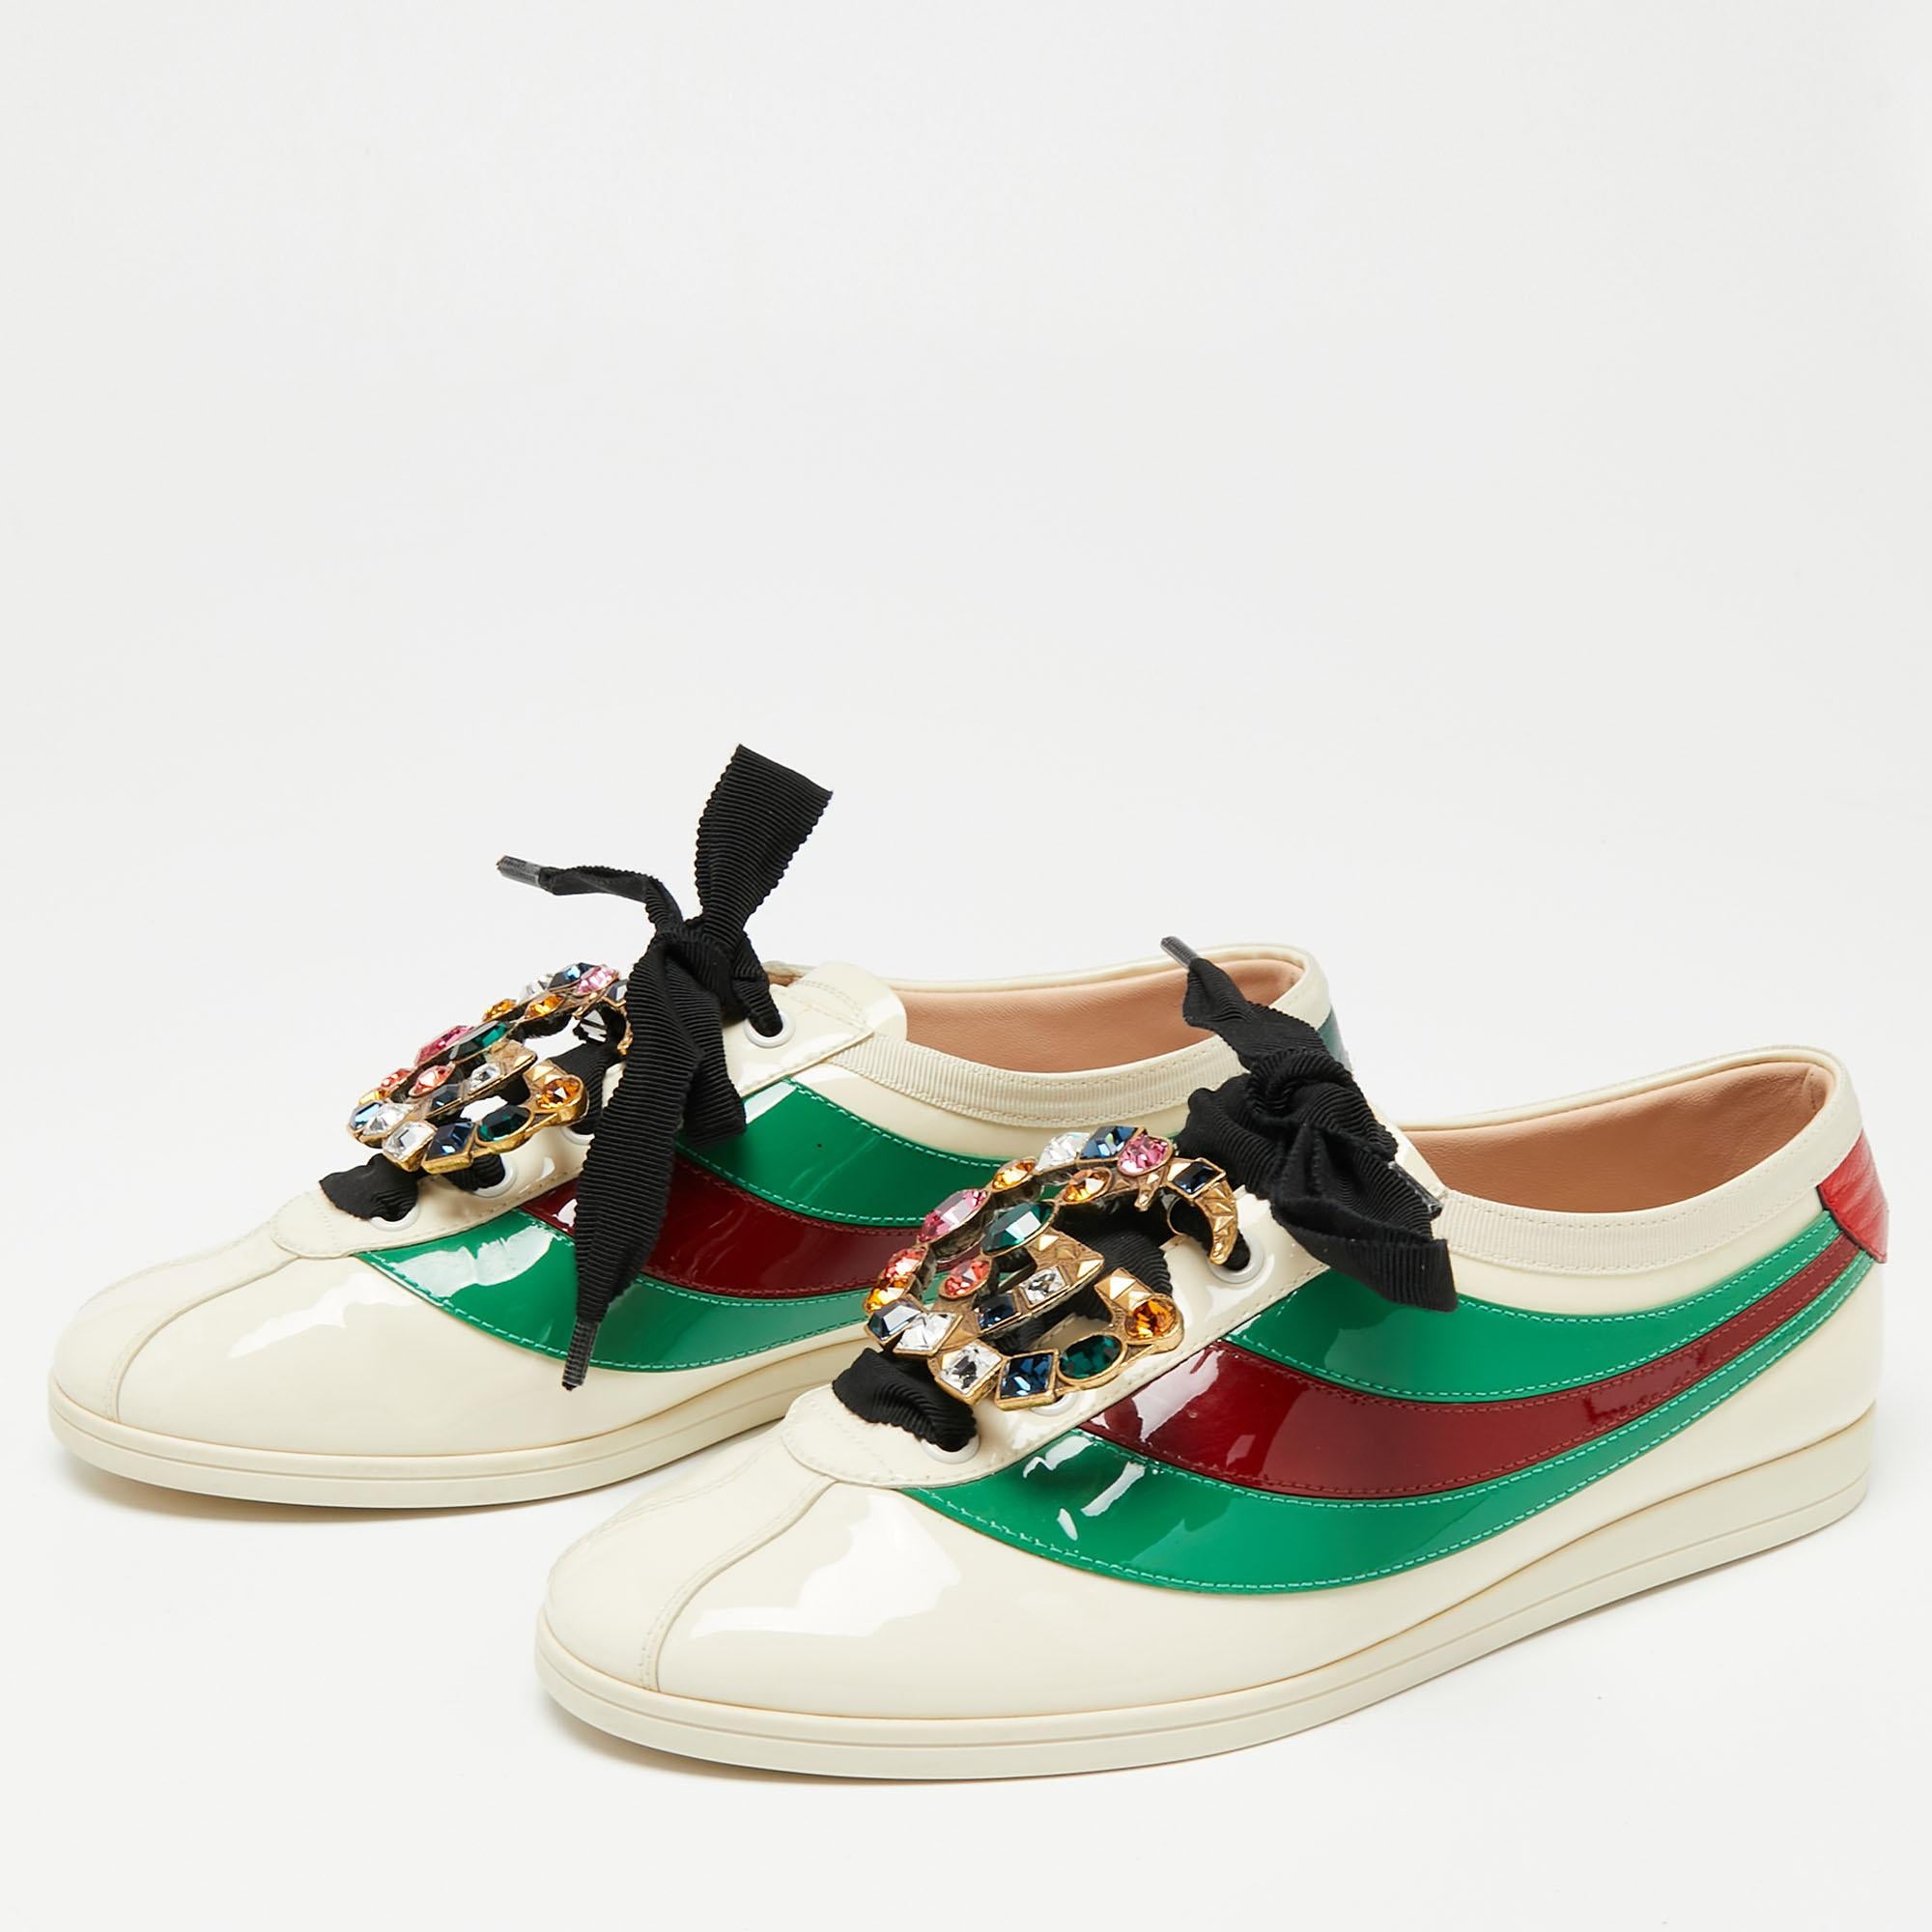 These Gucci sneakers combine the heritage of the brand with an elegant appeal. Constructed from the patent leather, the upper is decorated with the classic Web stripe and it displays a 'GG' crystal embellishment on the lace-up vamps. While the bee